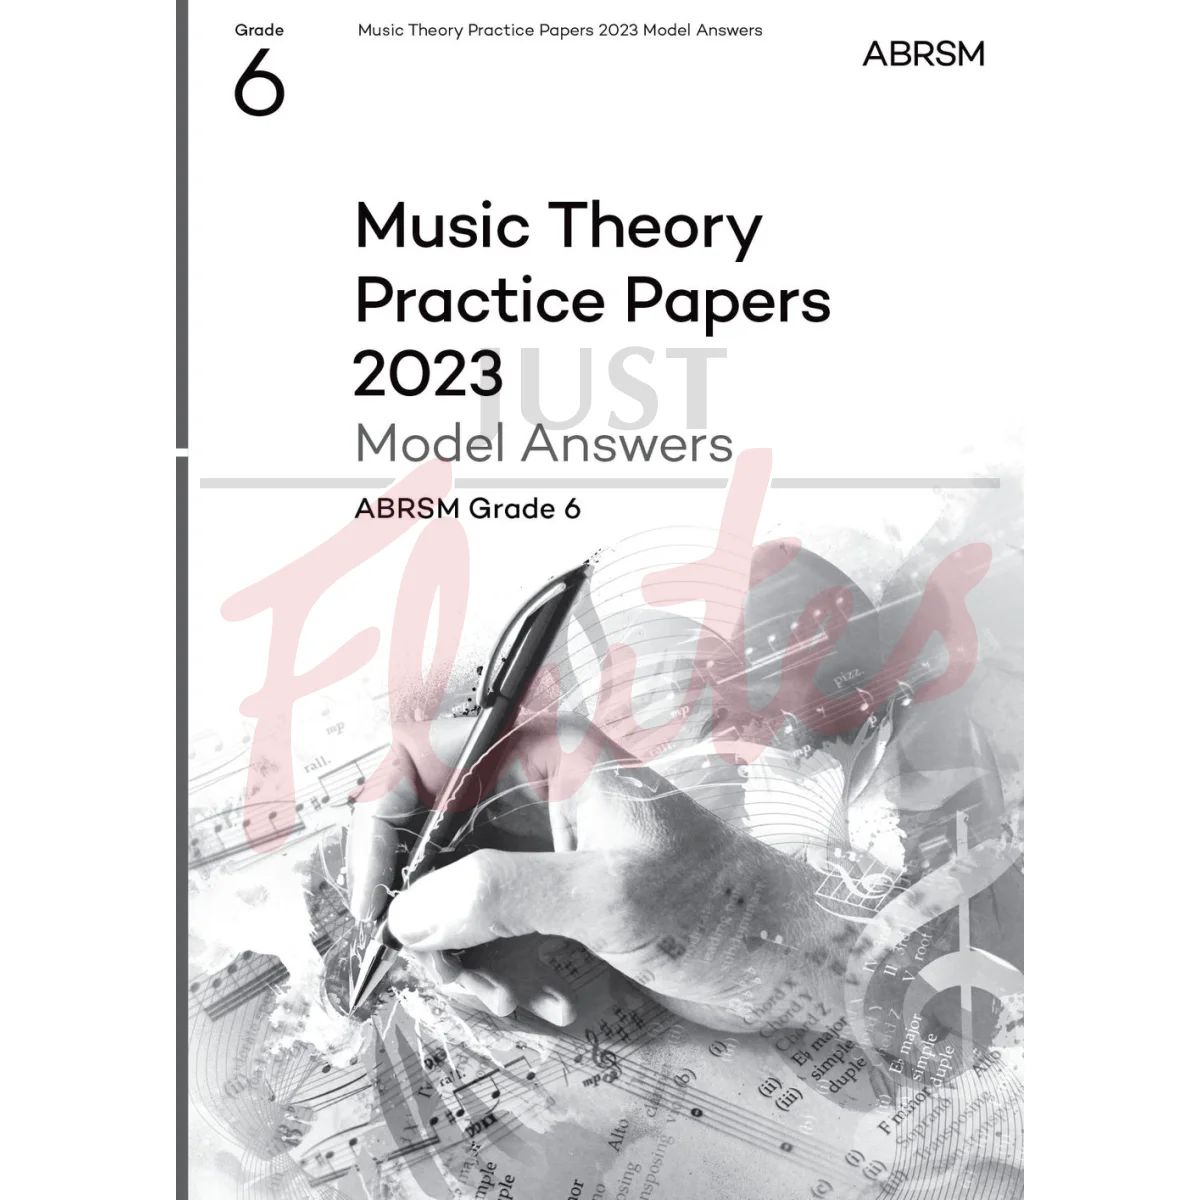 Music Theory Practice Papers 2023 Grade 6 - Model Answers